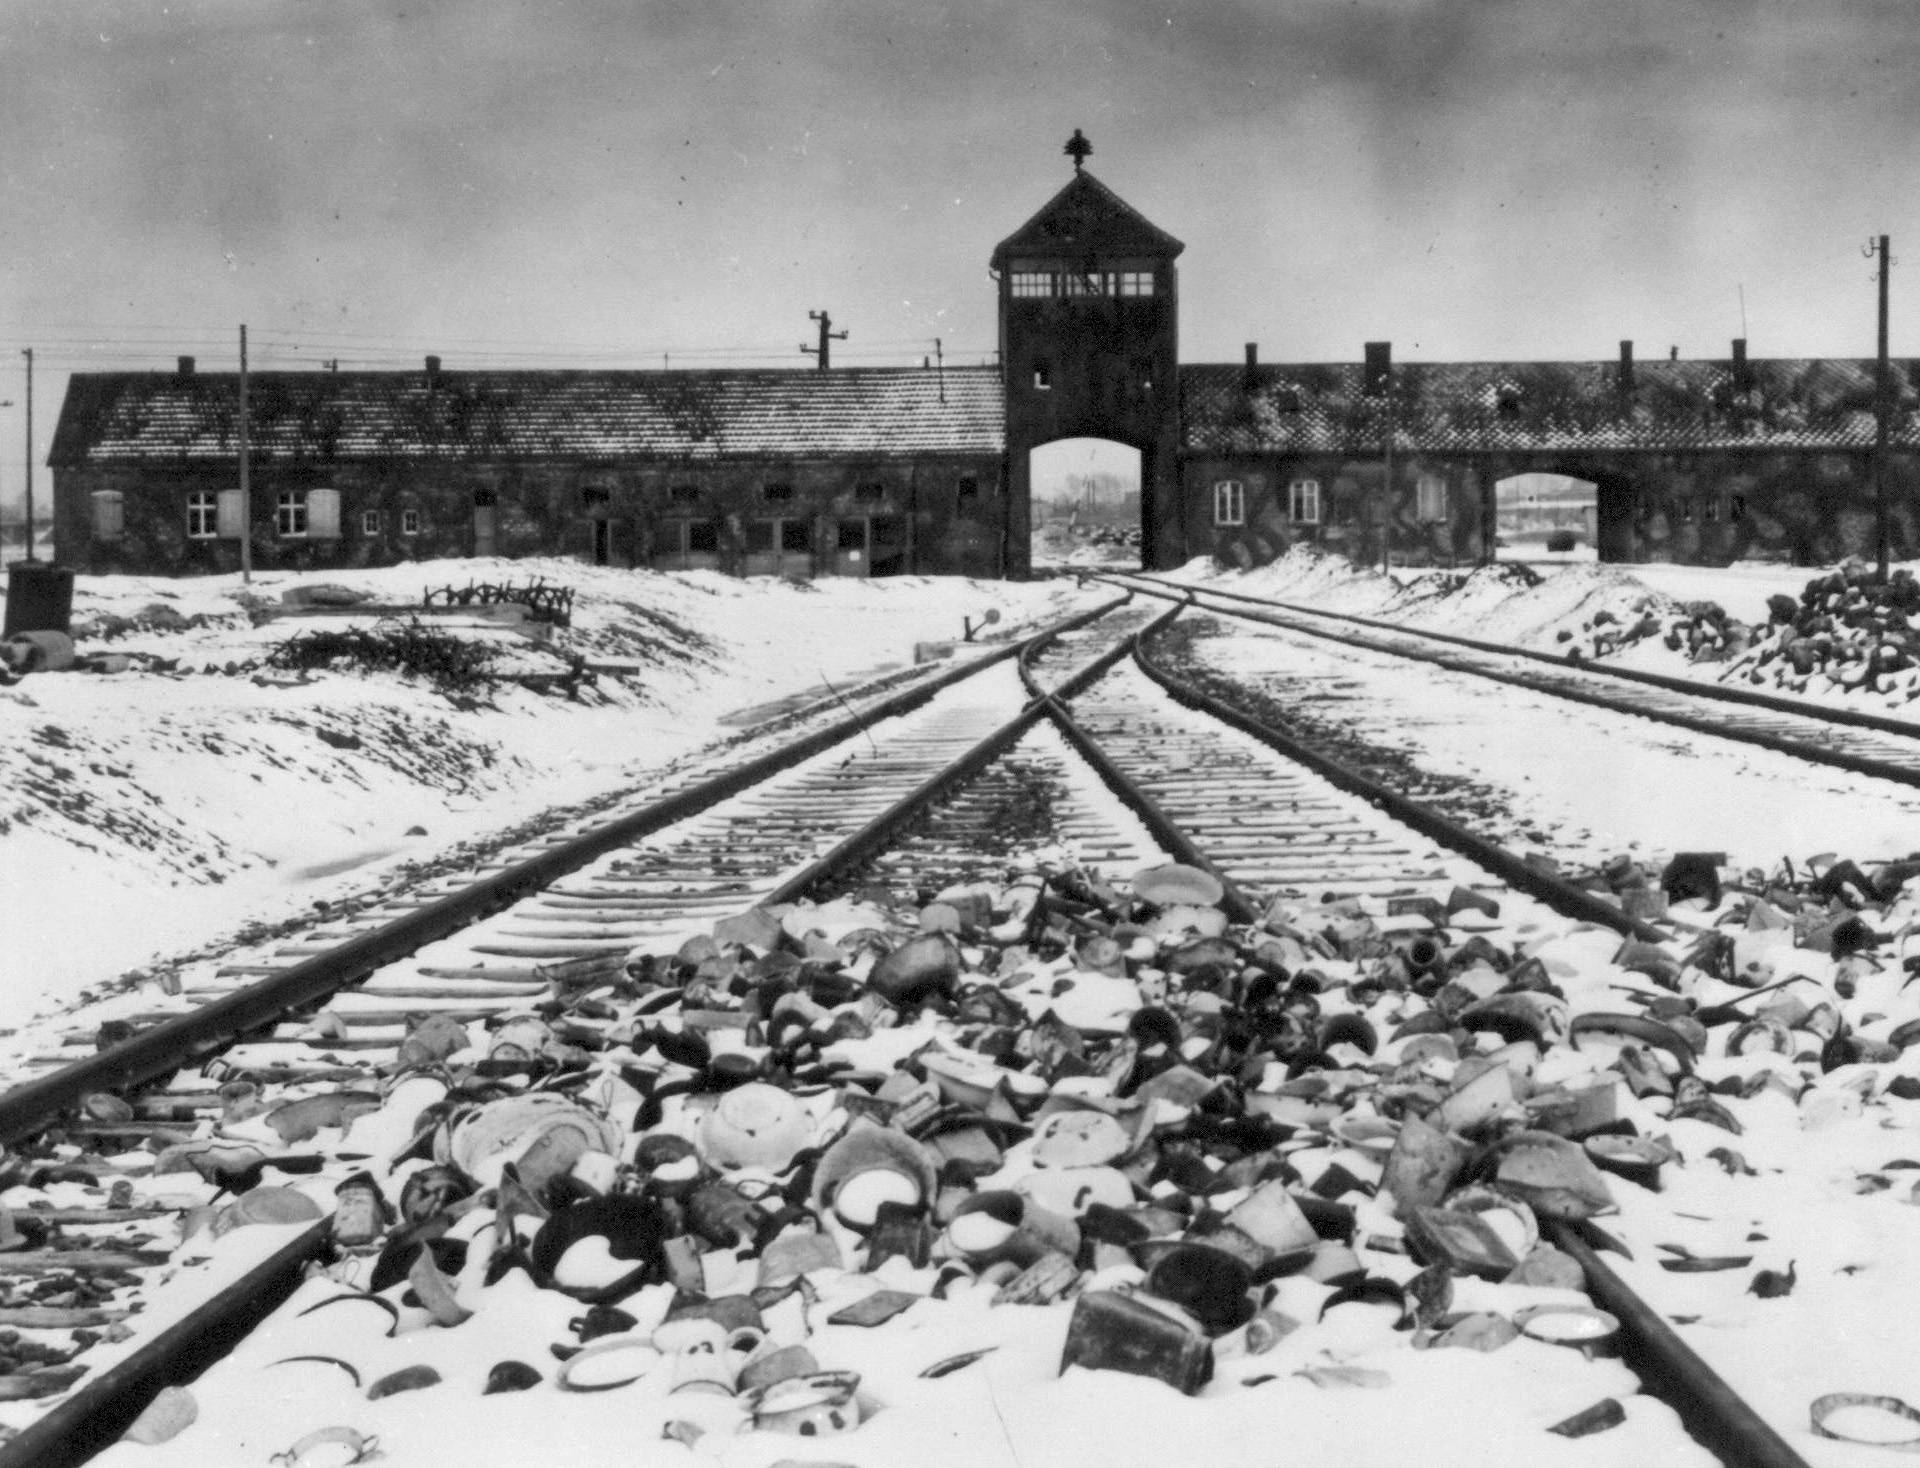 FILE PHOTO: An undated archive photograph shows Auschwitz II-Birkenau's main guard house which prisoners called "the gate of death\